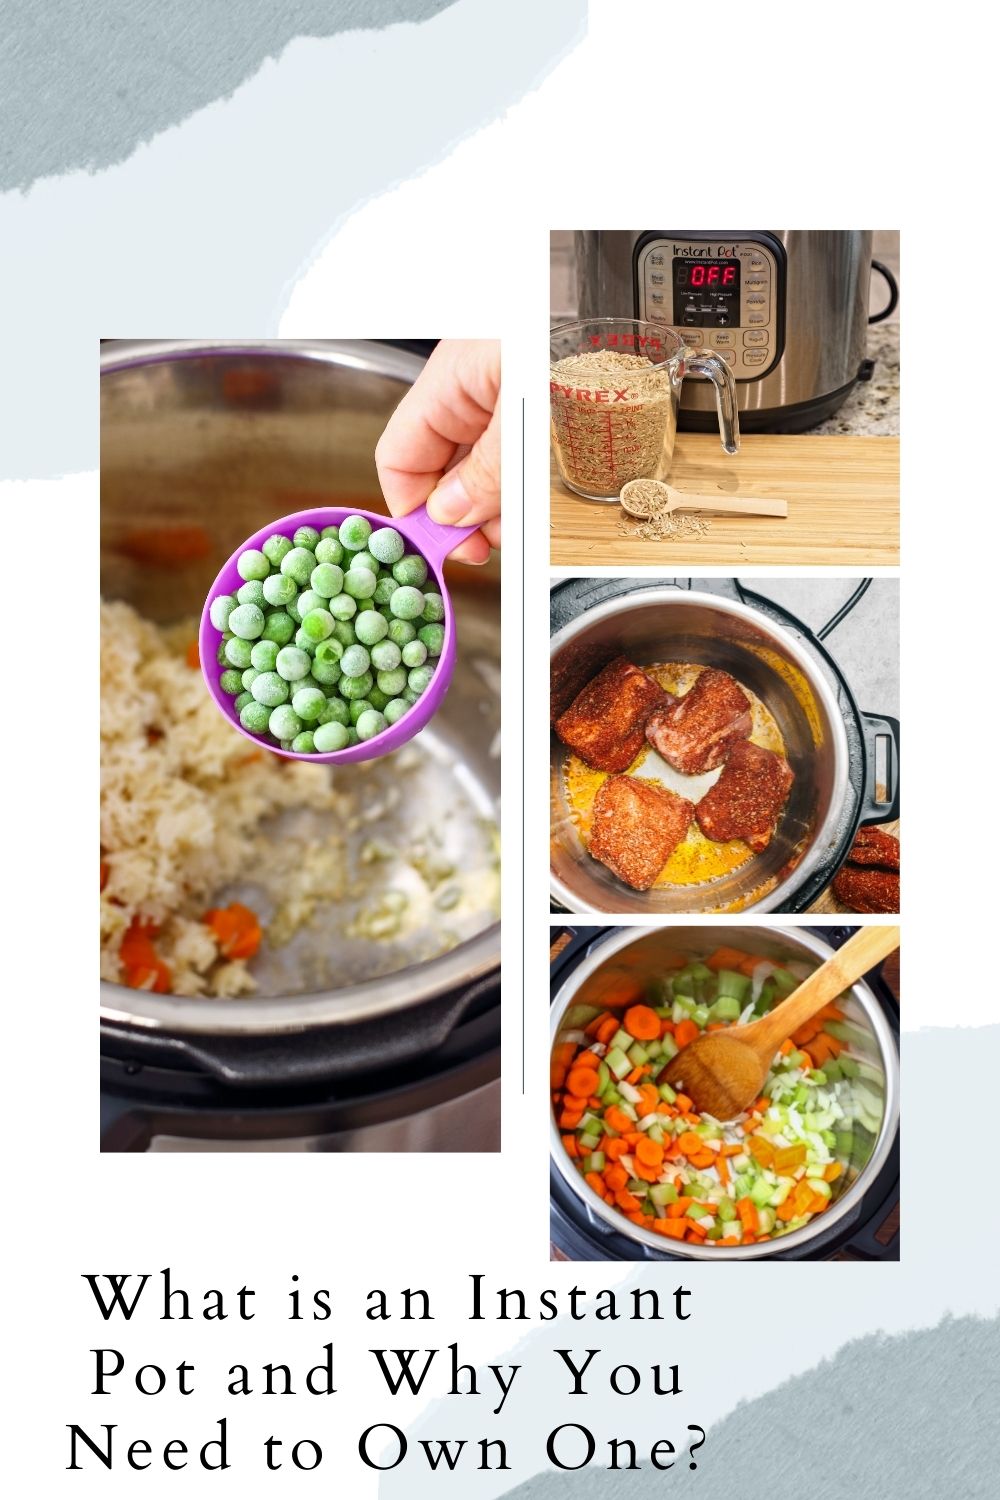 What is an Instant Pot and Why You Need to Own One